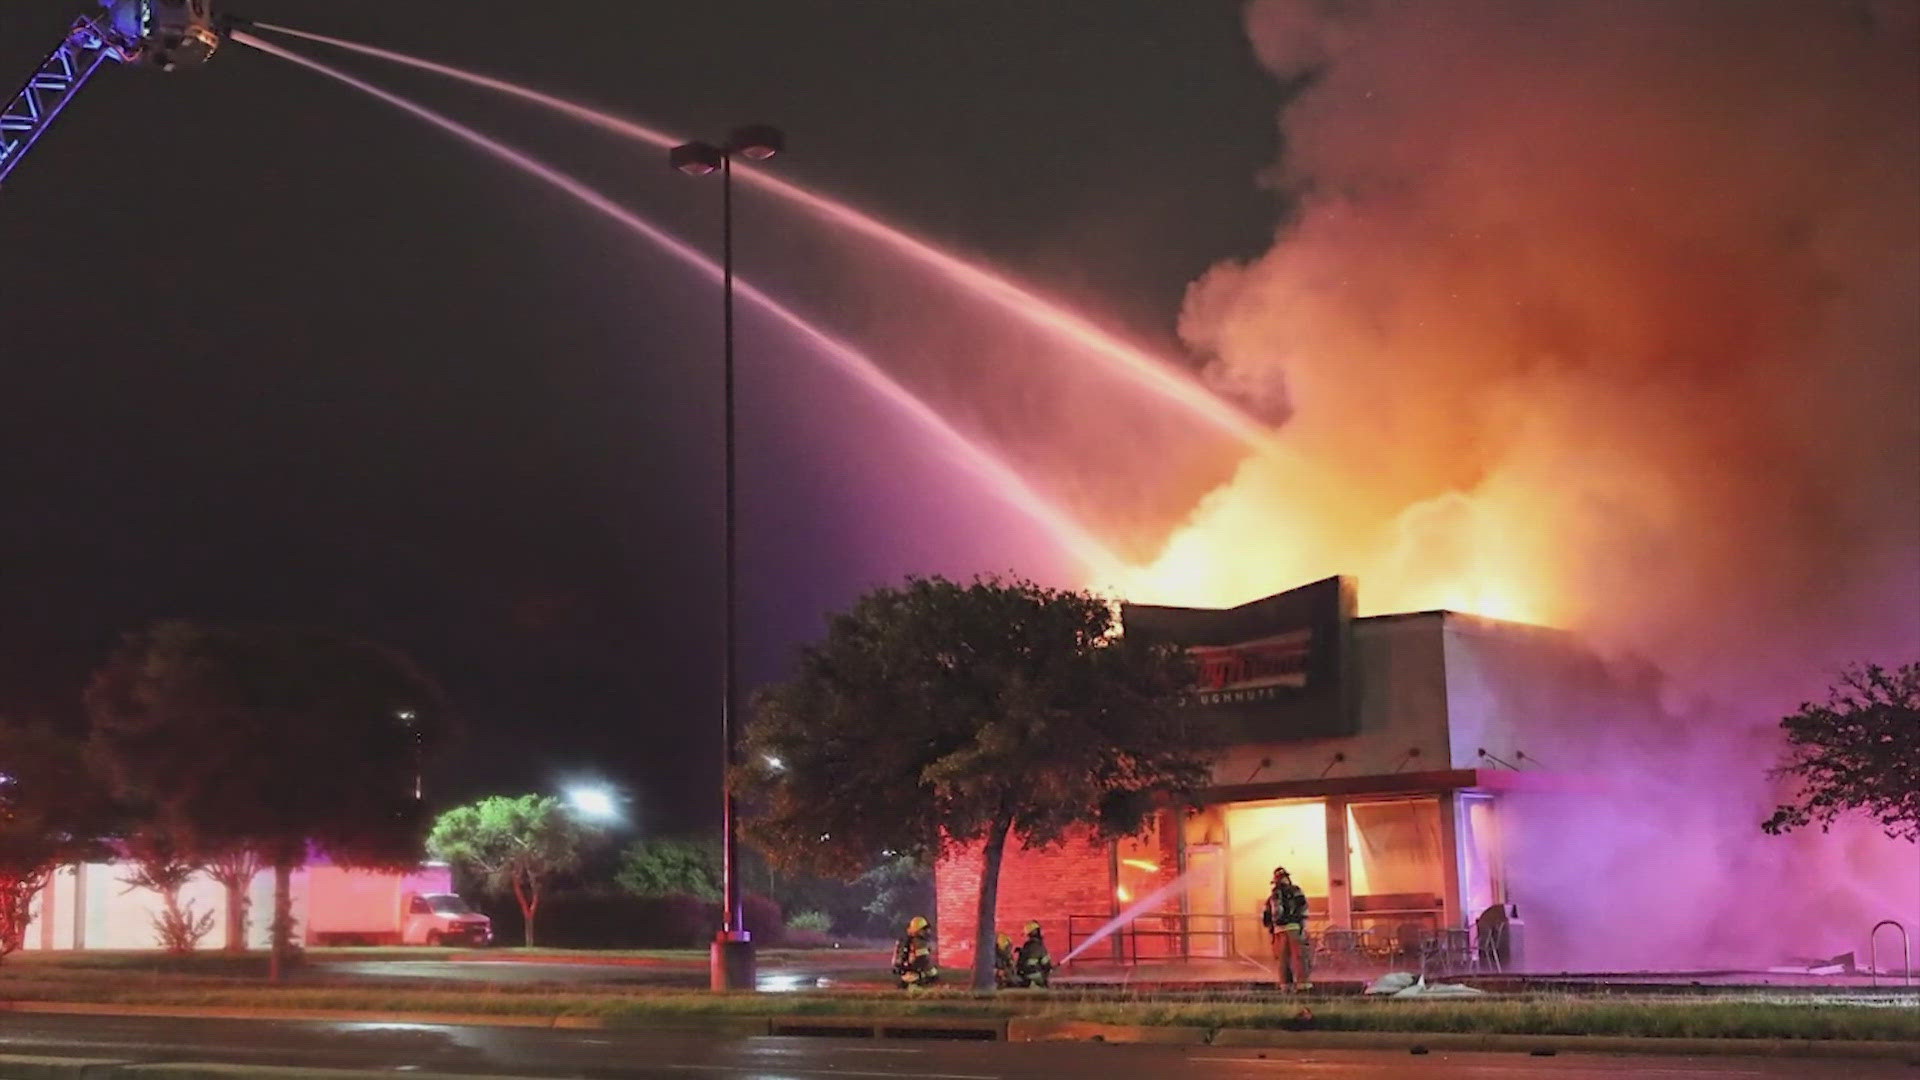 There is not much left of a Krispy Kreme Donuts went up in flames in College Station early Monday morning, according to the College Station Police Department.